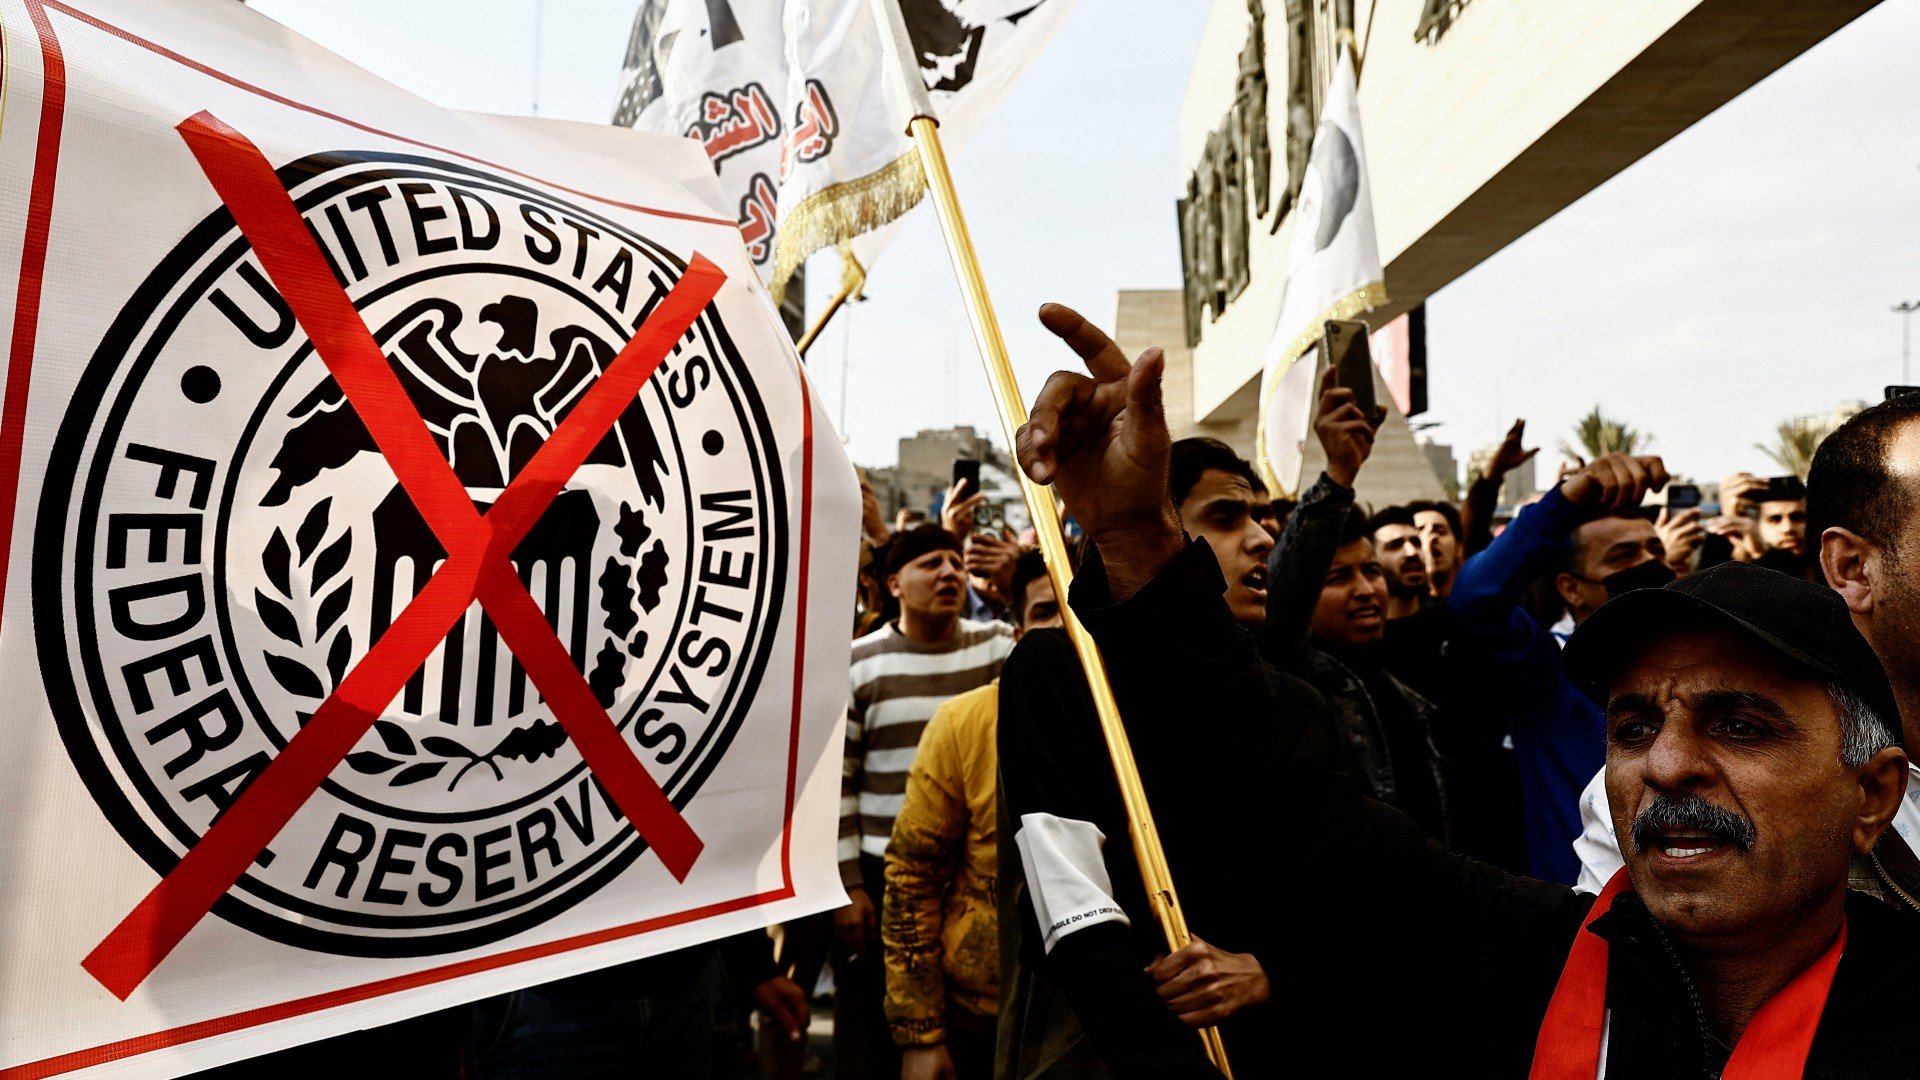 Iraqi protesters demonstrate against the dinar's slide in value against the US dollar in Baghdad, 3 February (Reuters)